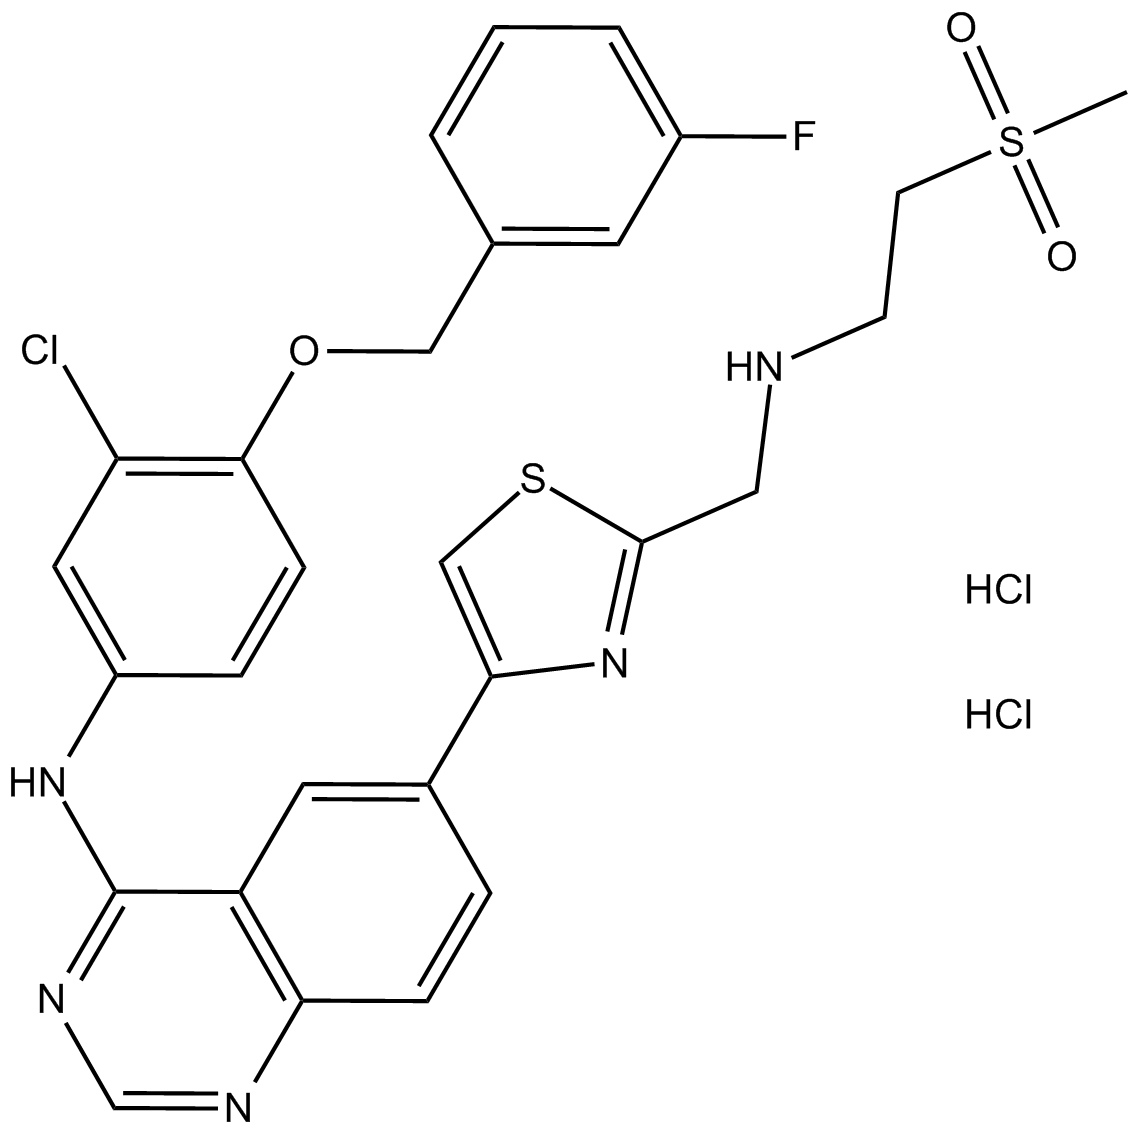 GW 583340 dihydrochloride  Chemical Structure